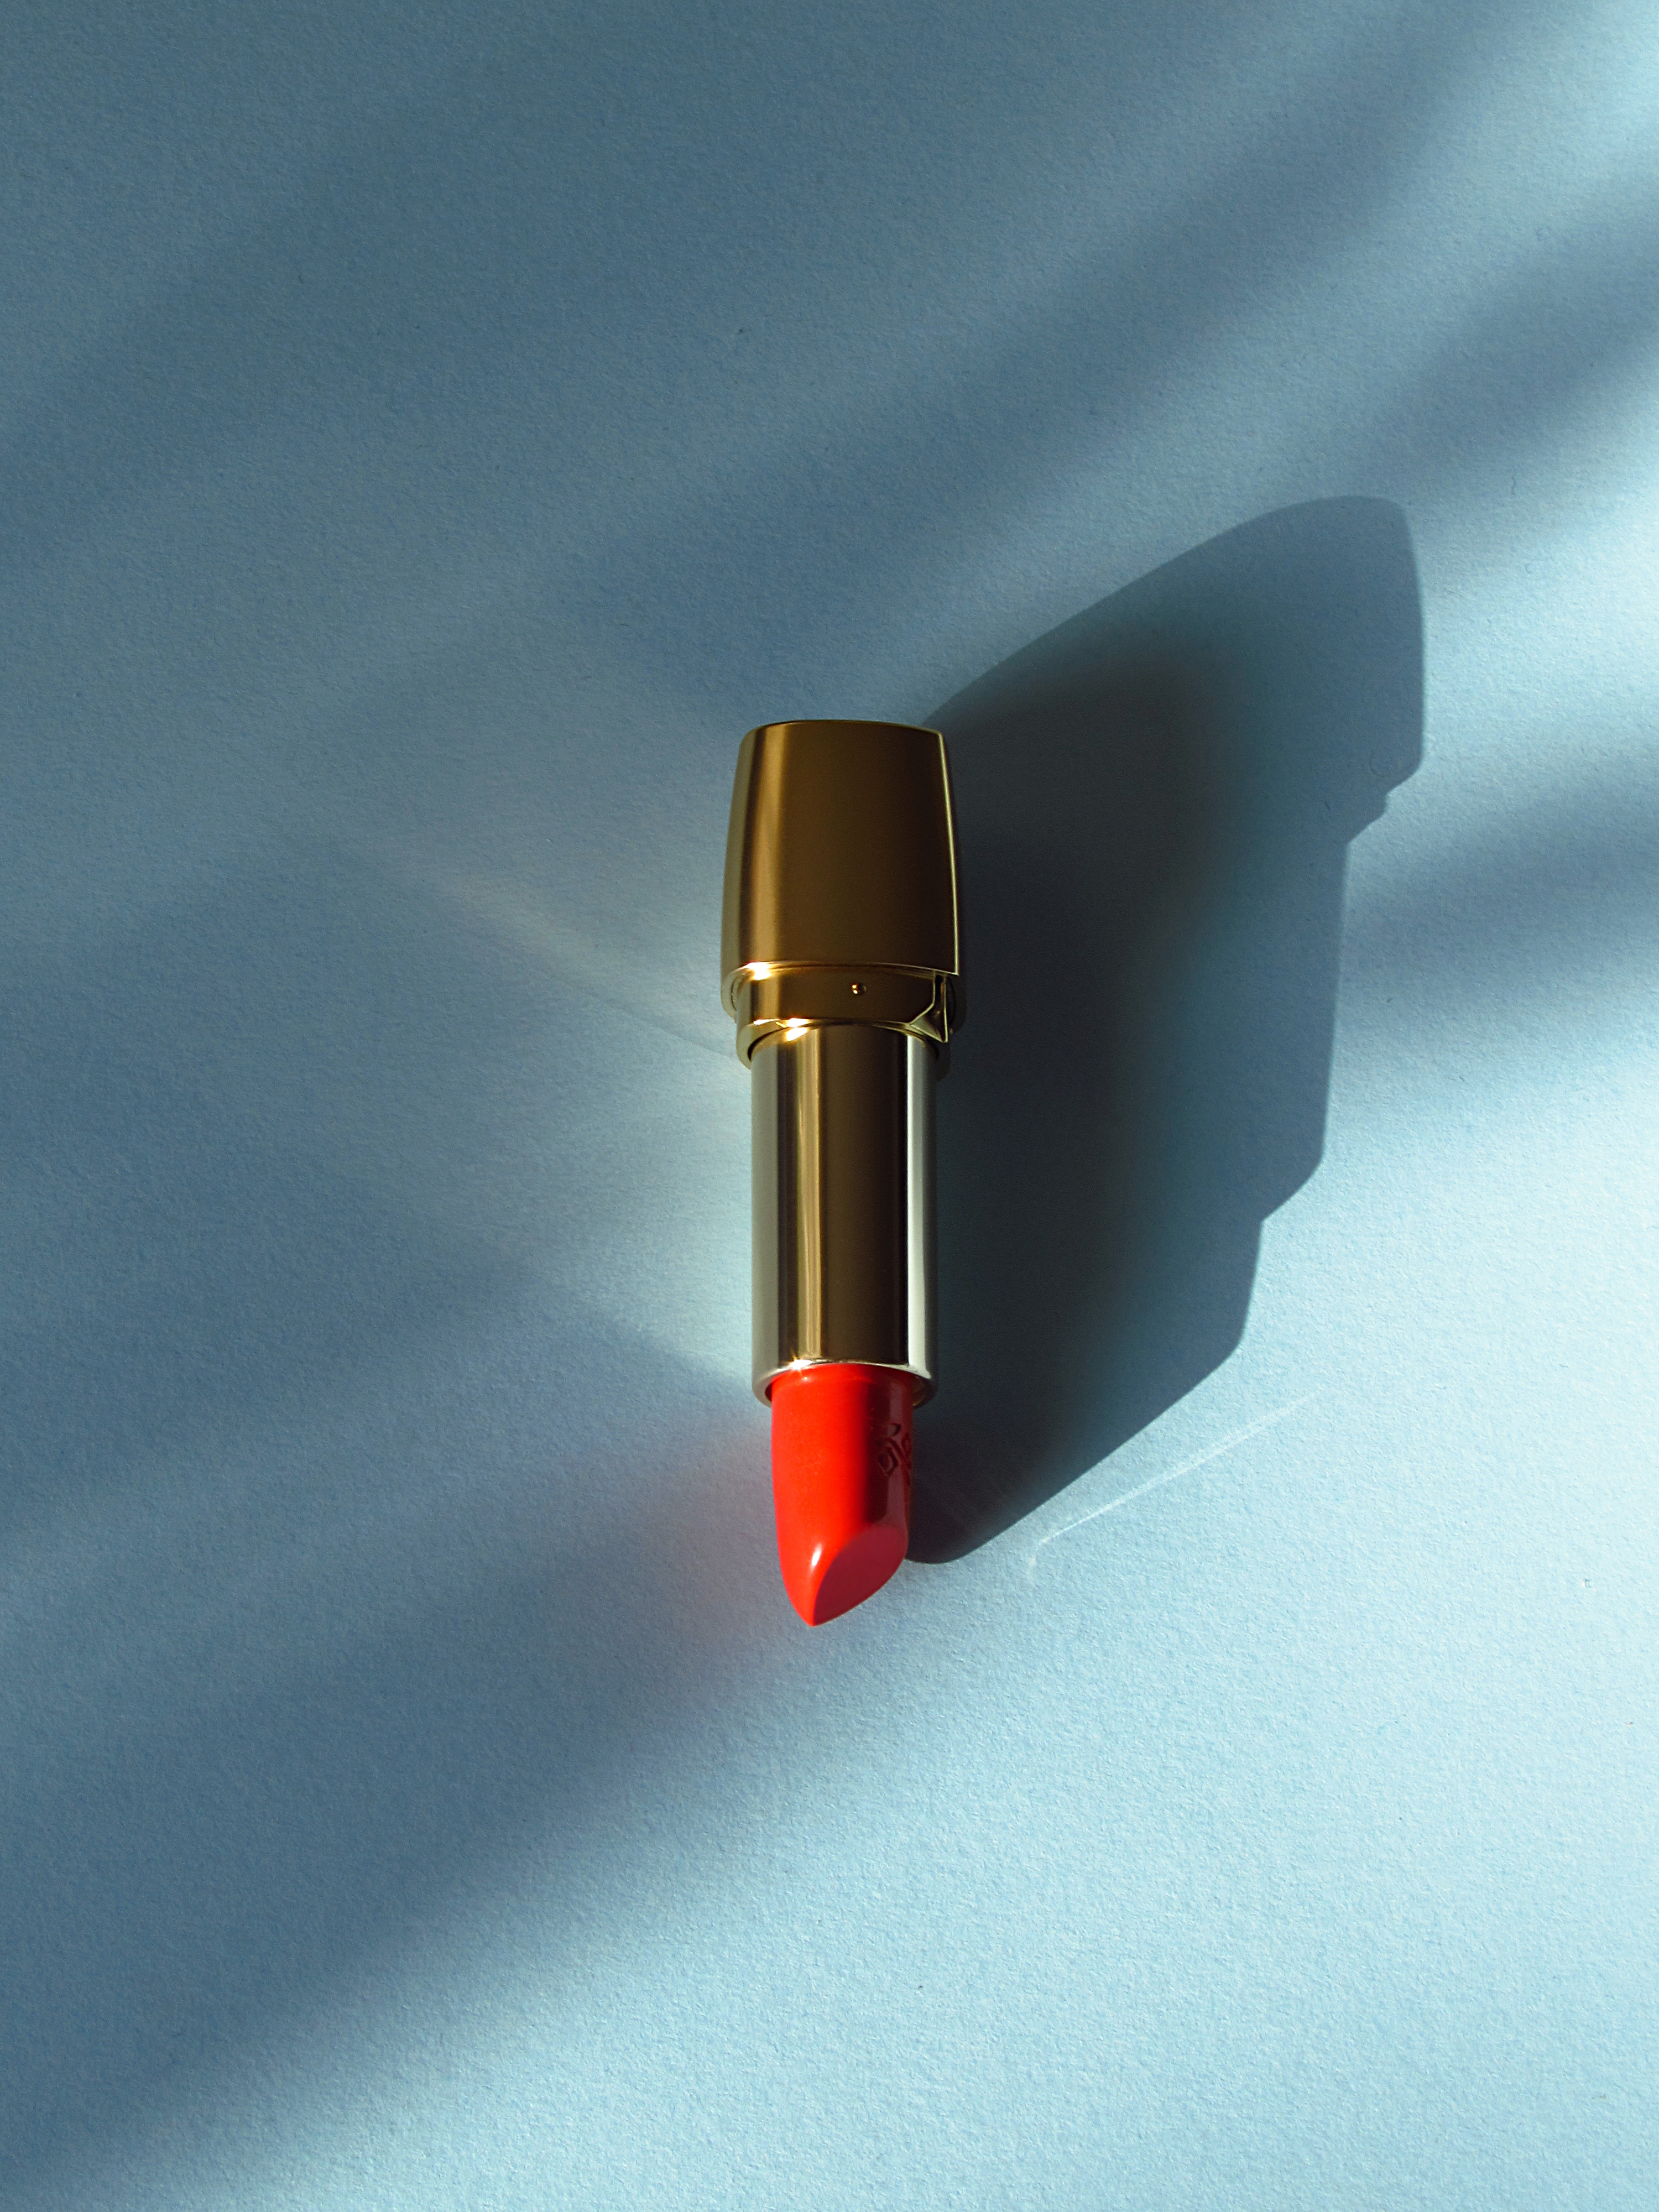 Deborah Milano Rossetto Milano Red Lipstick in No. 11 under the afternoon light on a blue background.